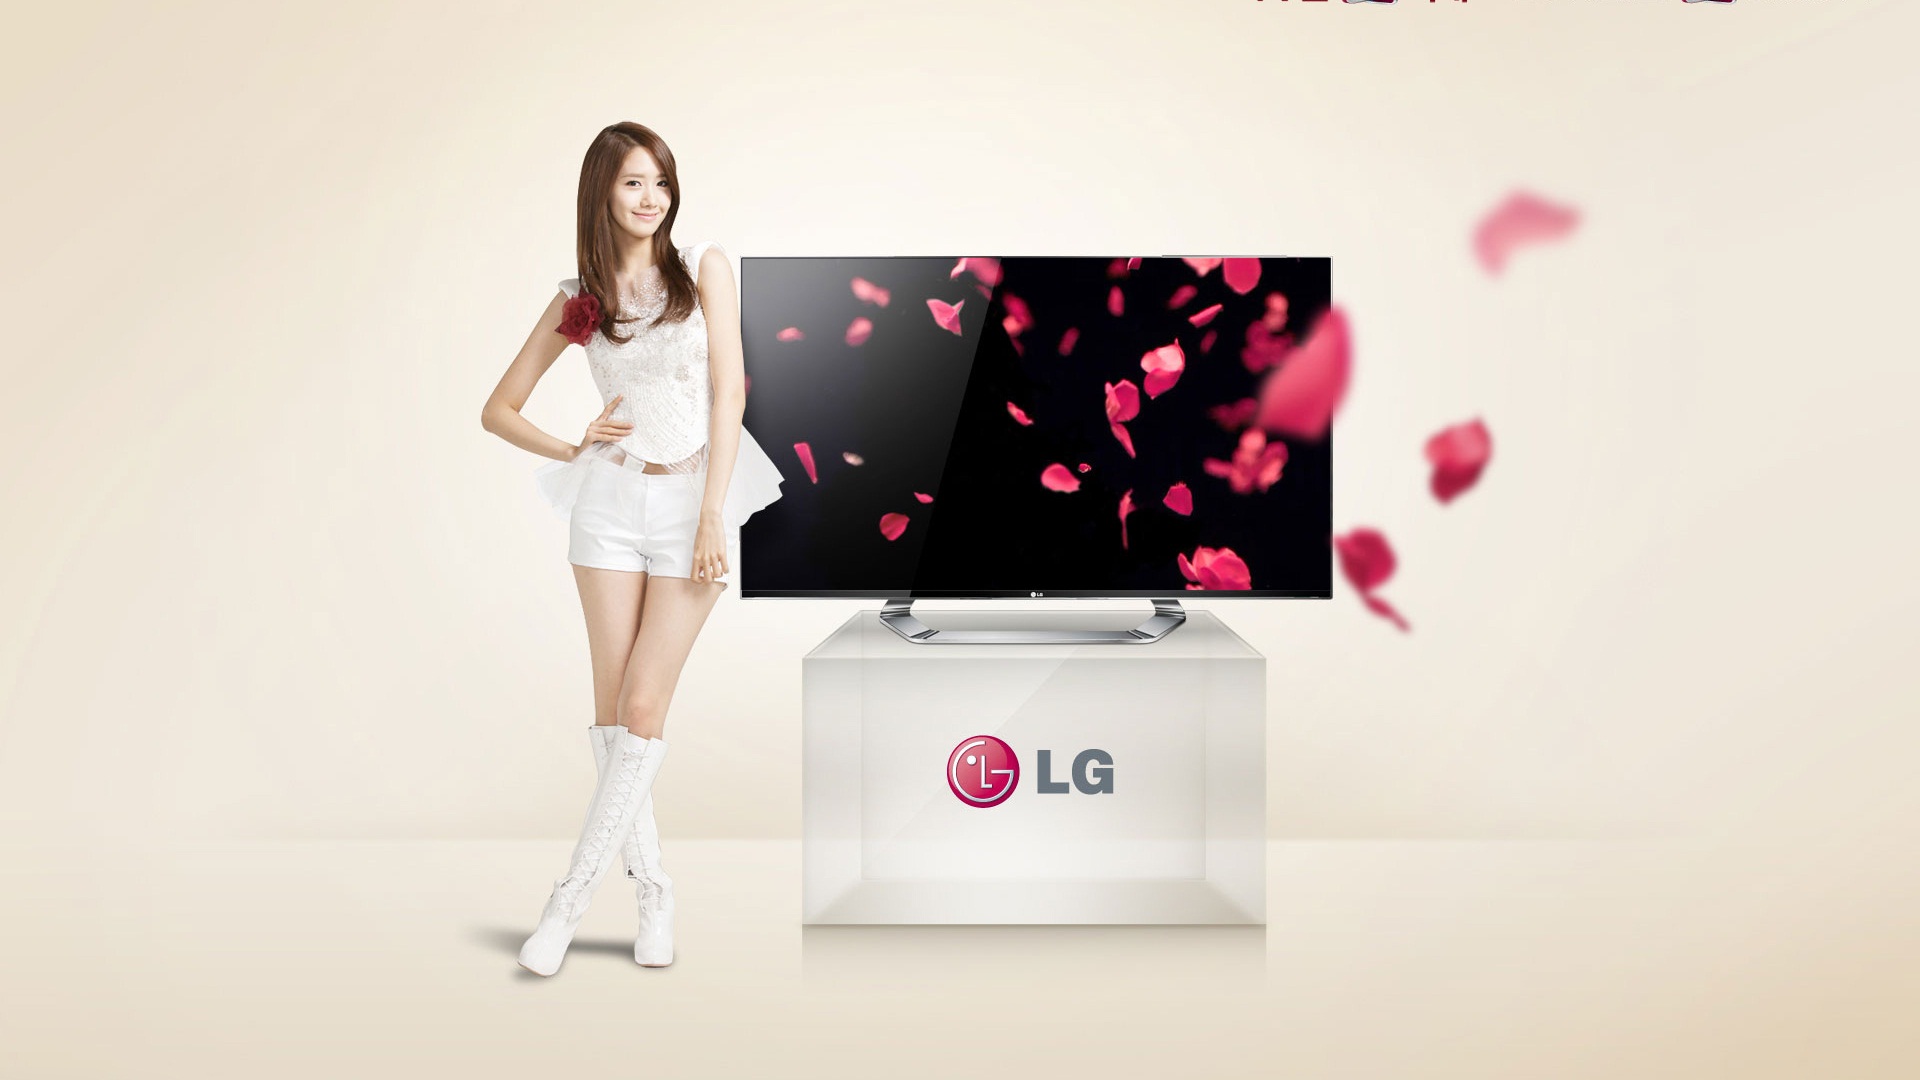 Girls Generation ACE and LG endorsements ads HD wallpapers #20 - 1920x1080